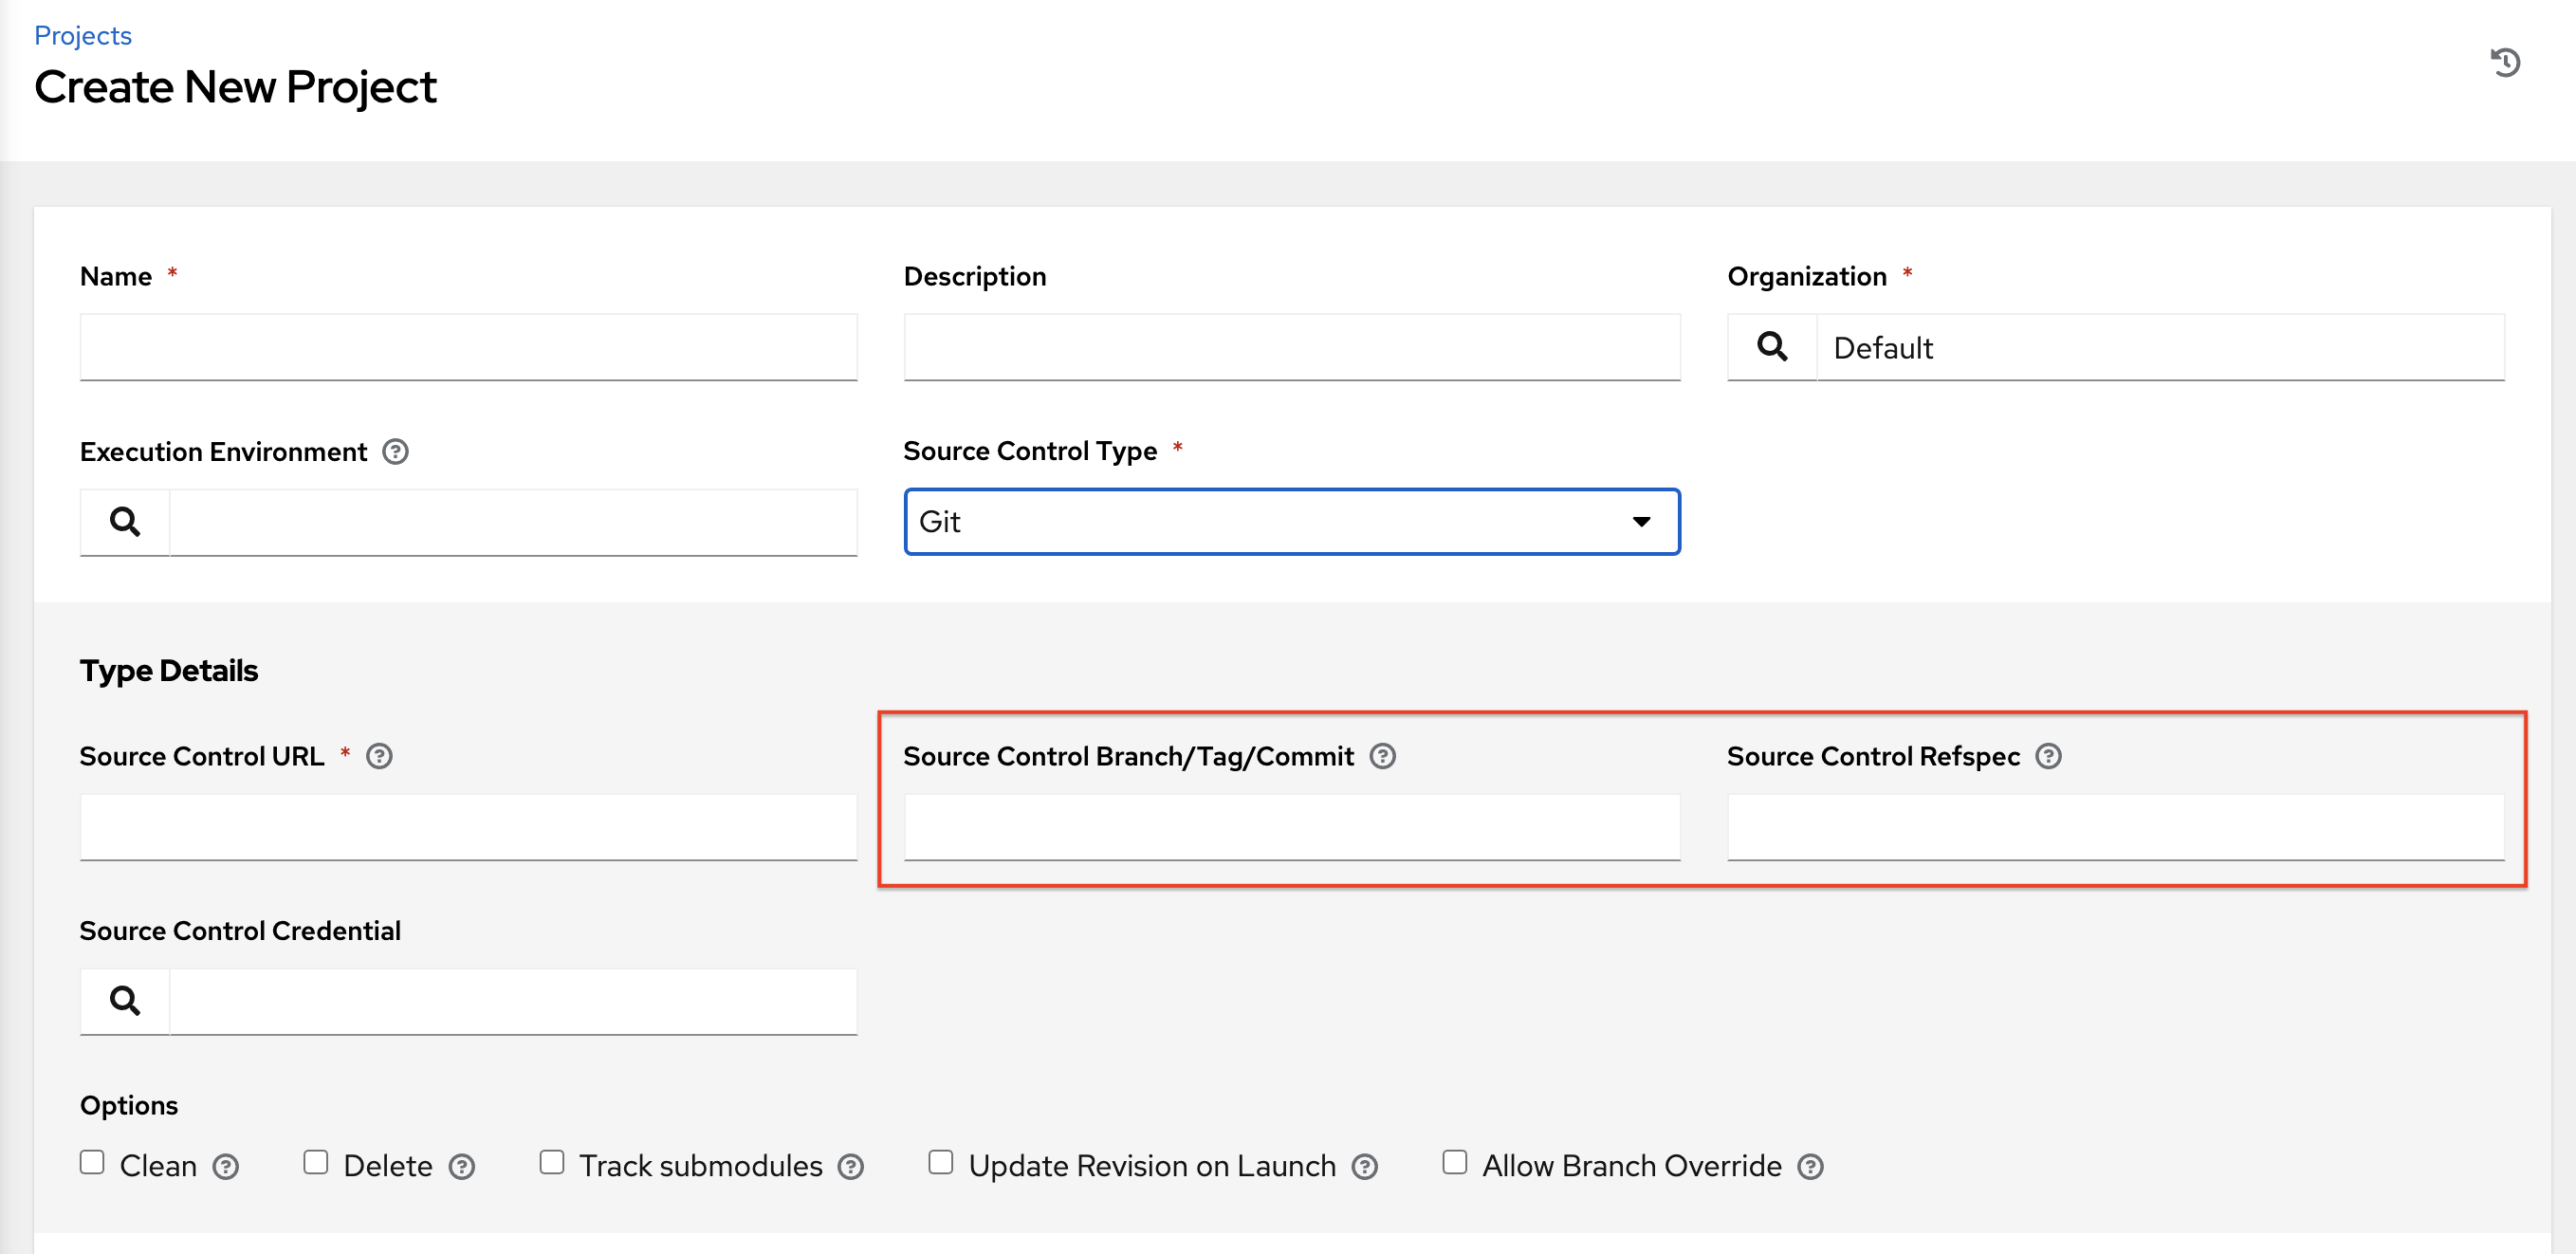 Create New Project page with SCM branching options emphasized